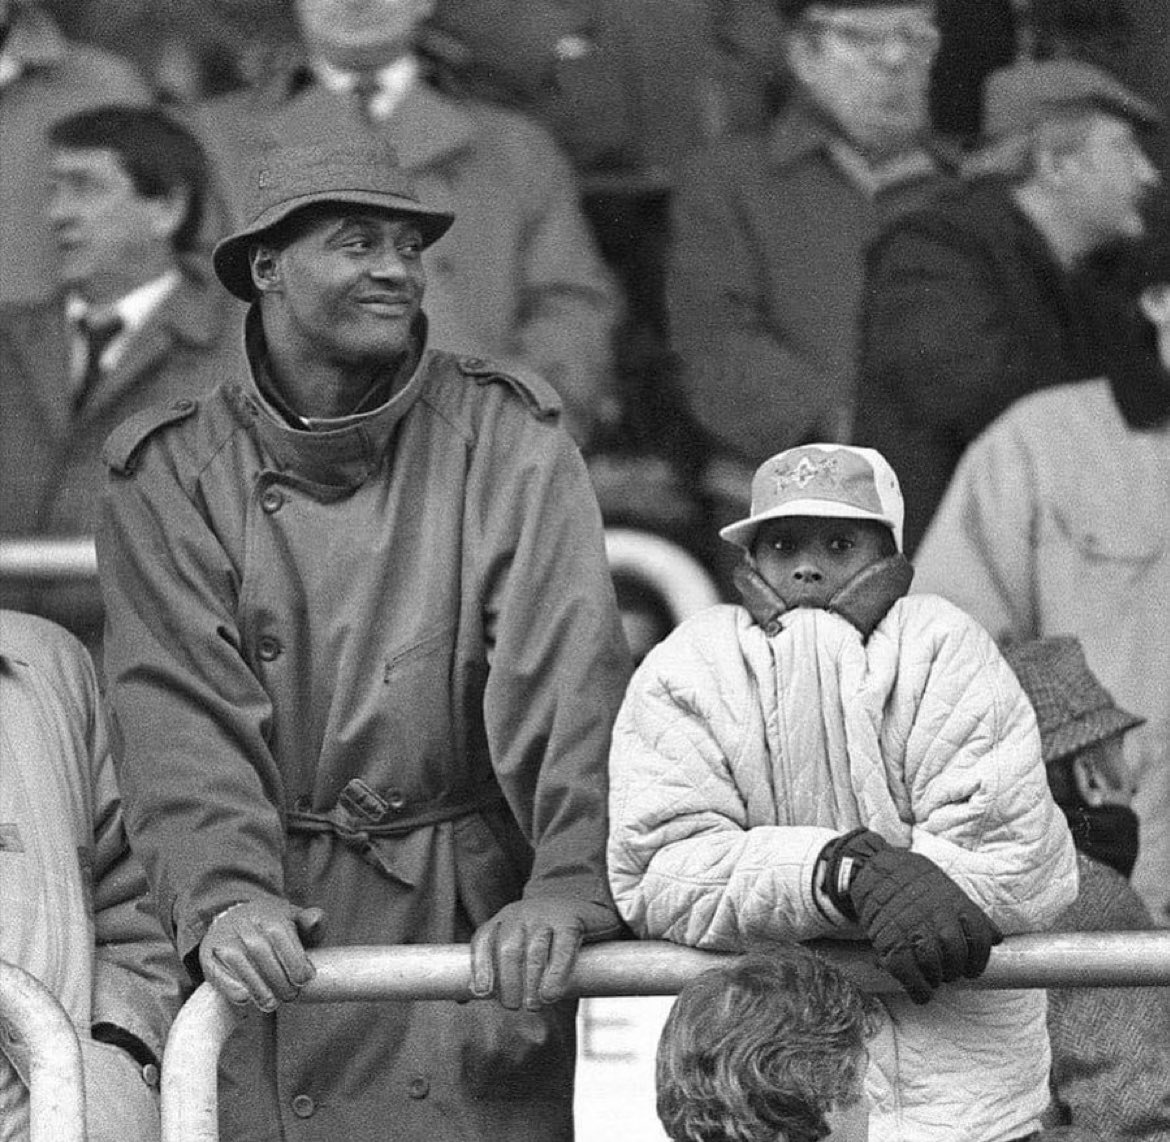 Young Kobe at a soccer game in Italy with his father. What a photo. 💜